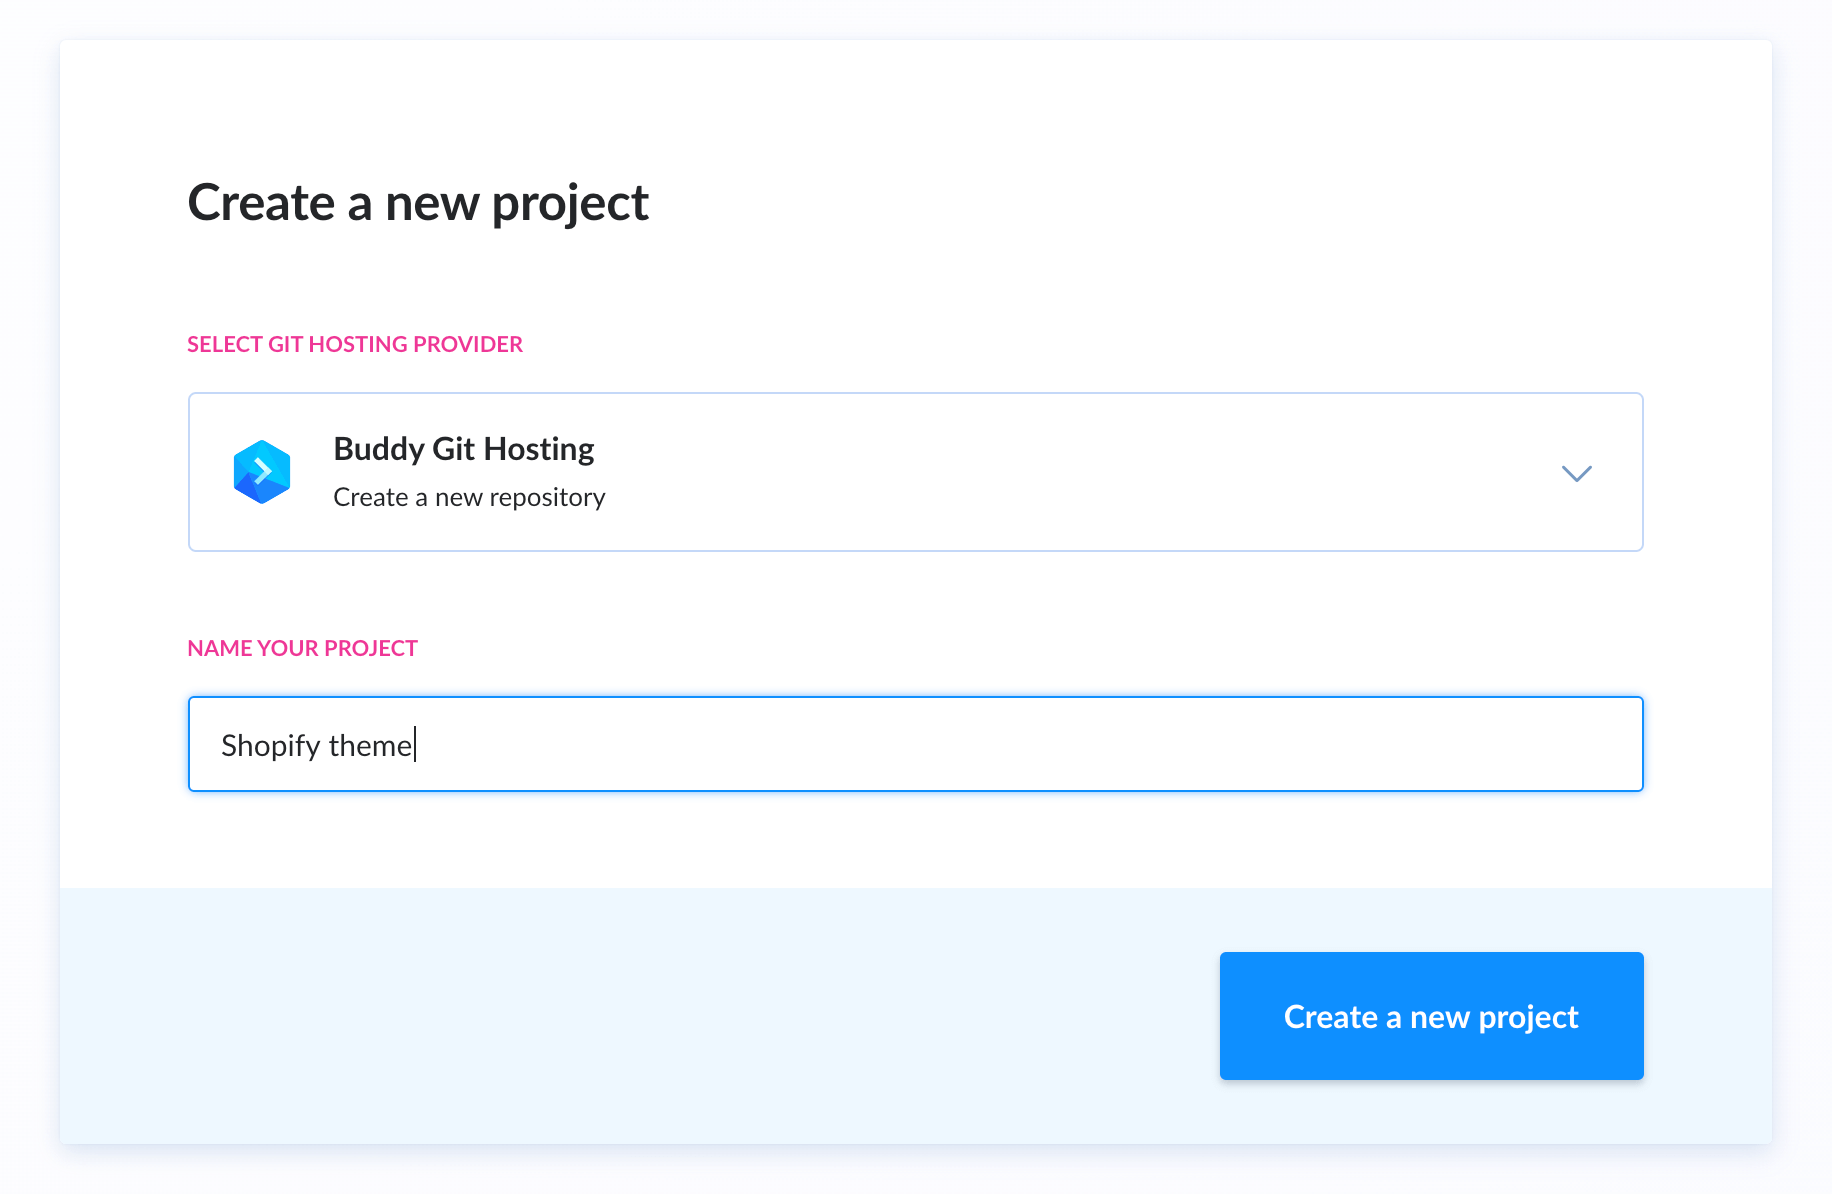 Adding new project in Buddy